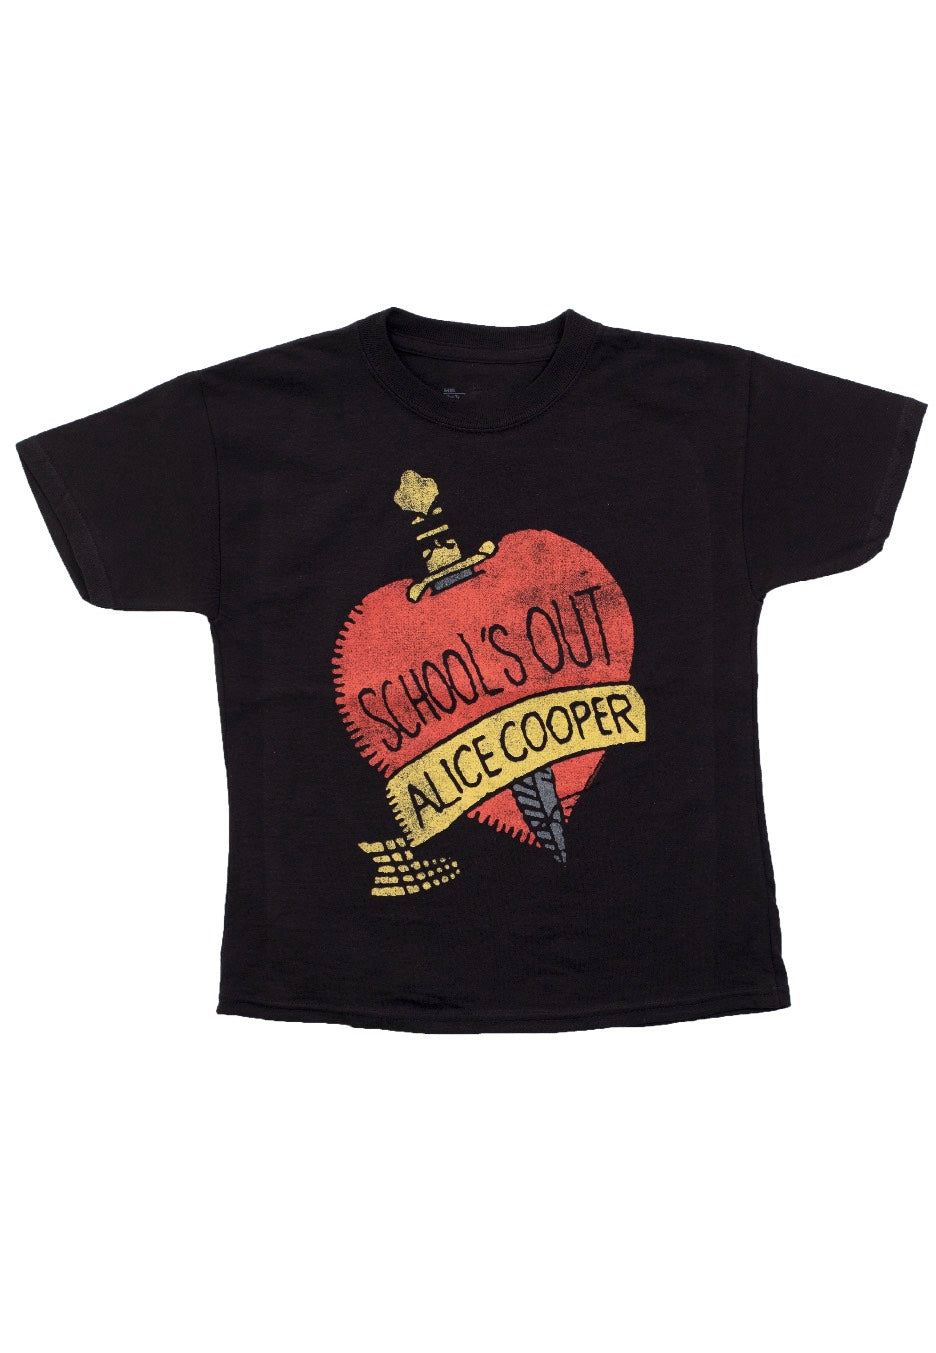 Alice Cooper - Schools Out Kids - T-Shirt